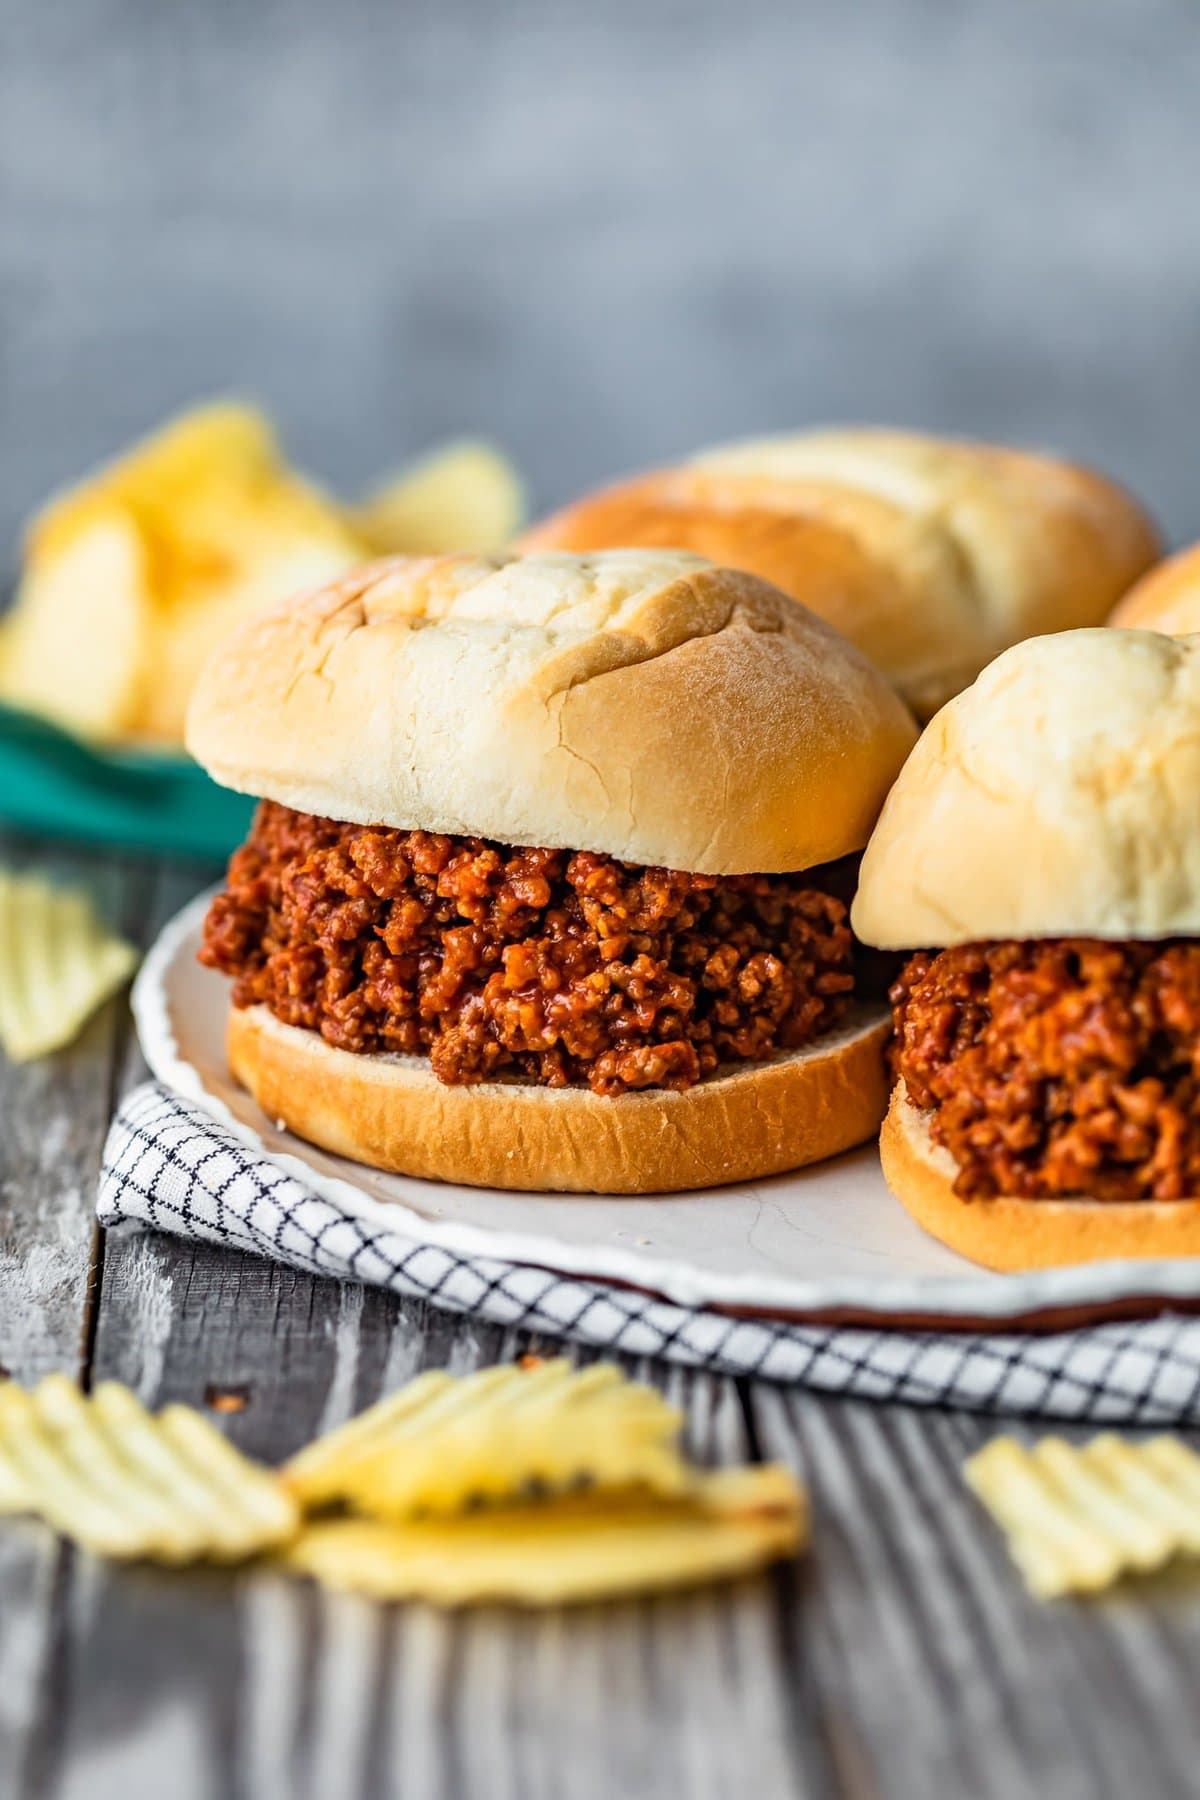 Homemade Sloppy Joes Recipe {From Scratch} - VIDEO!!